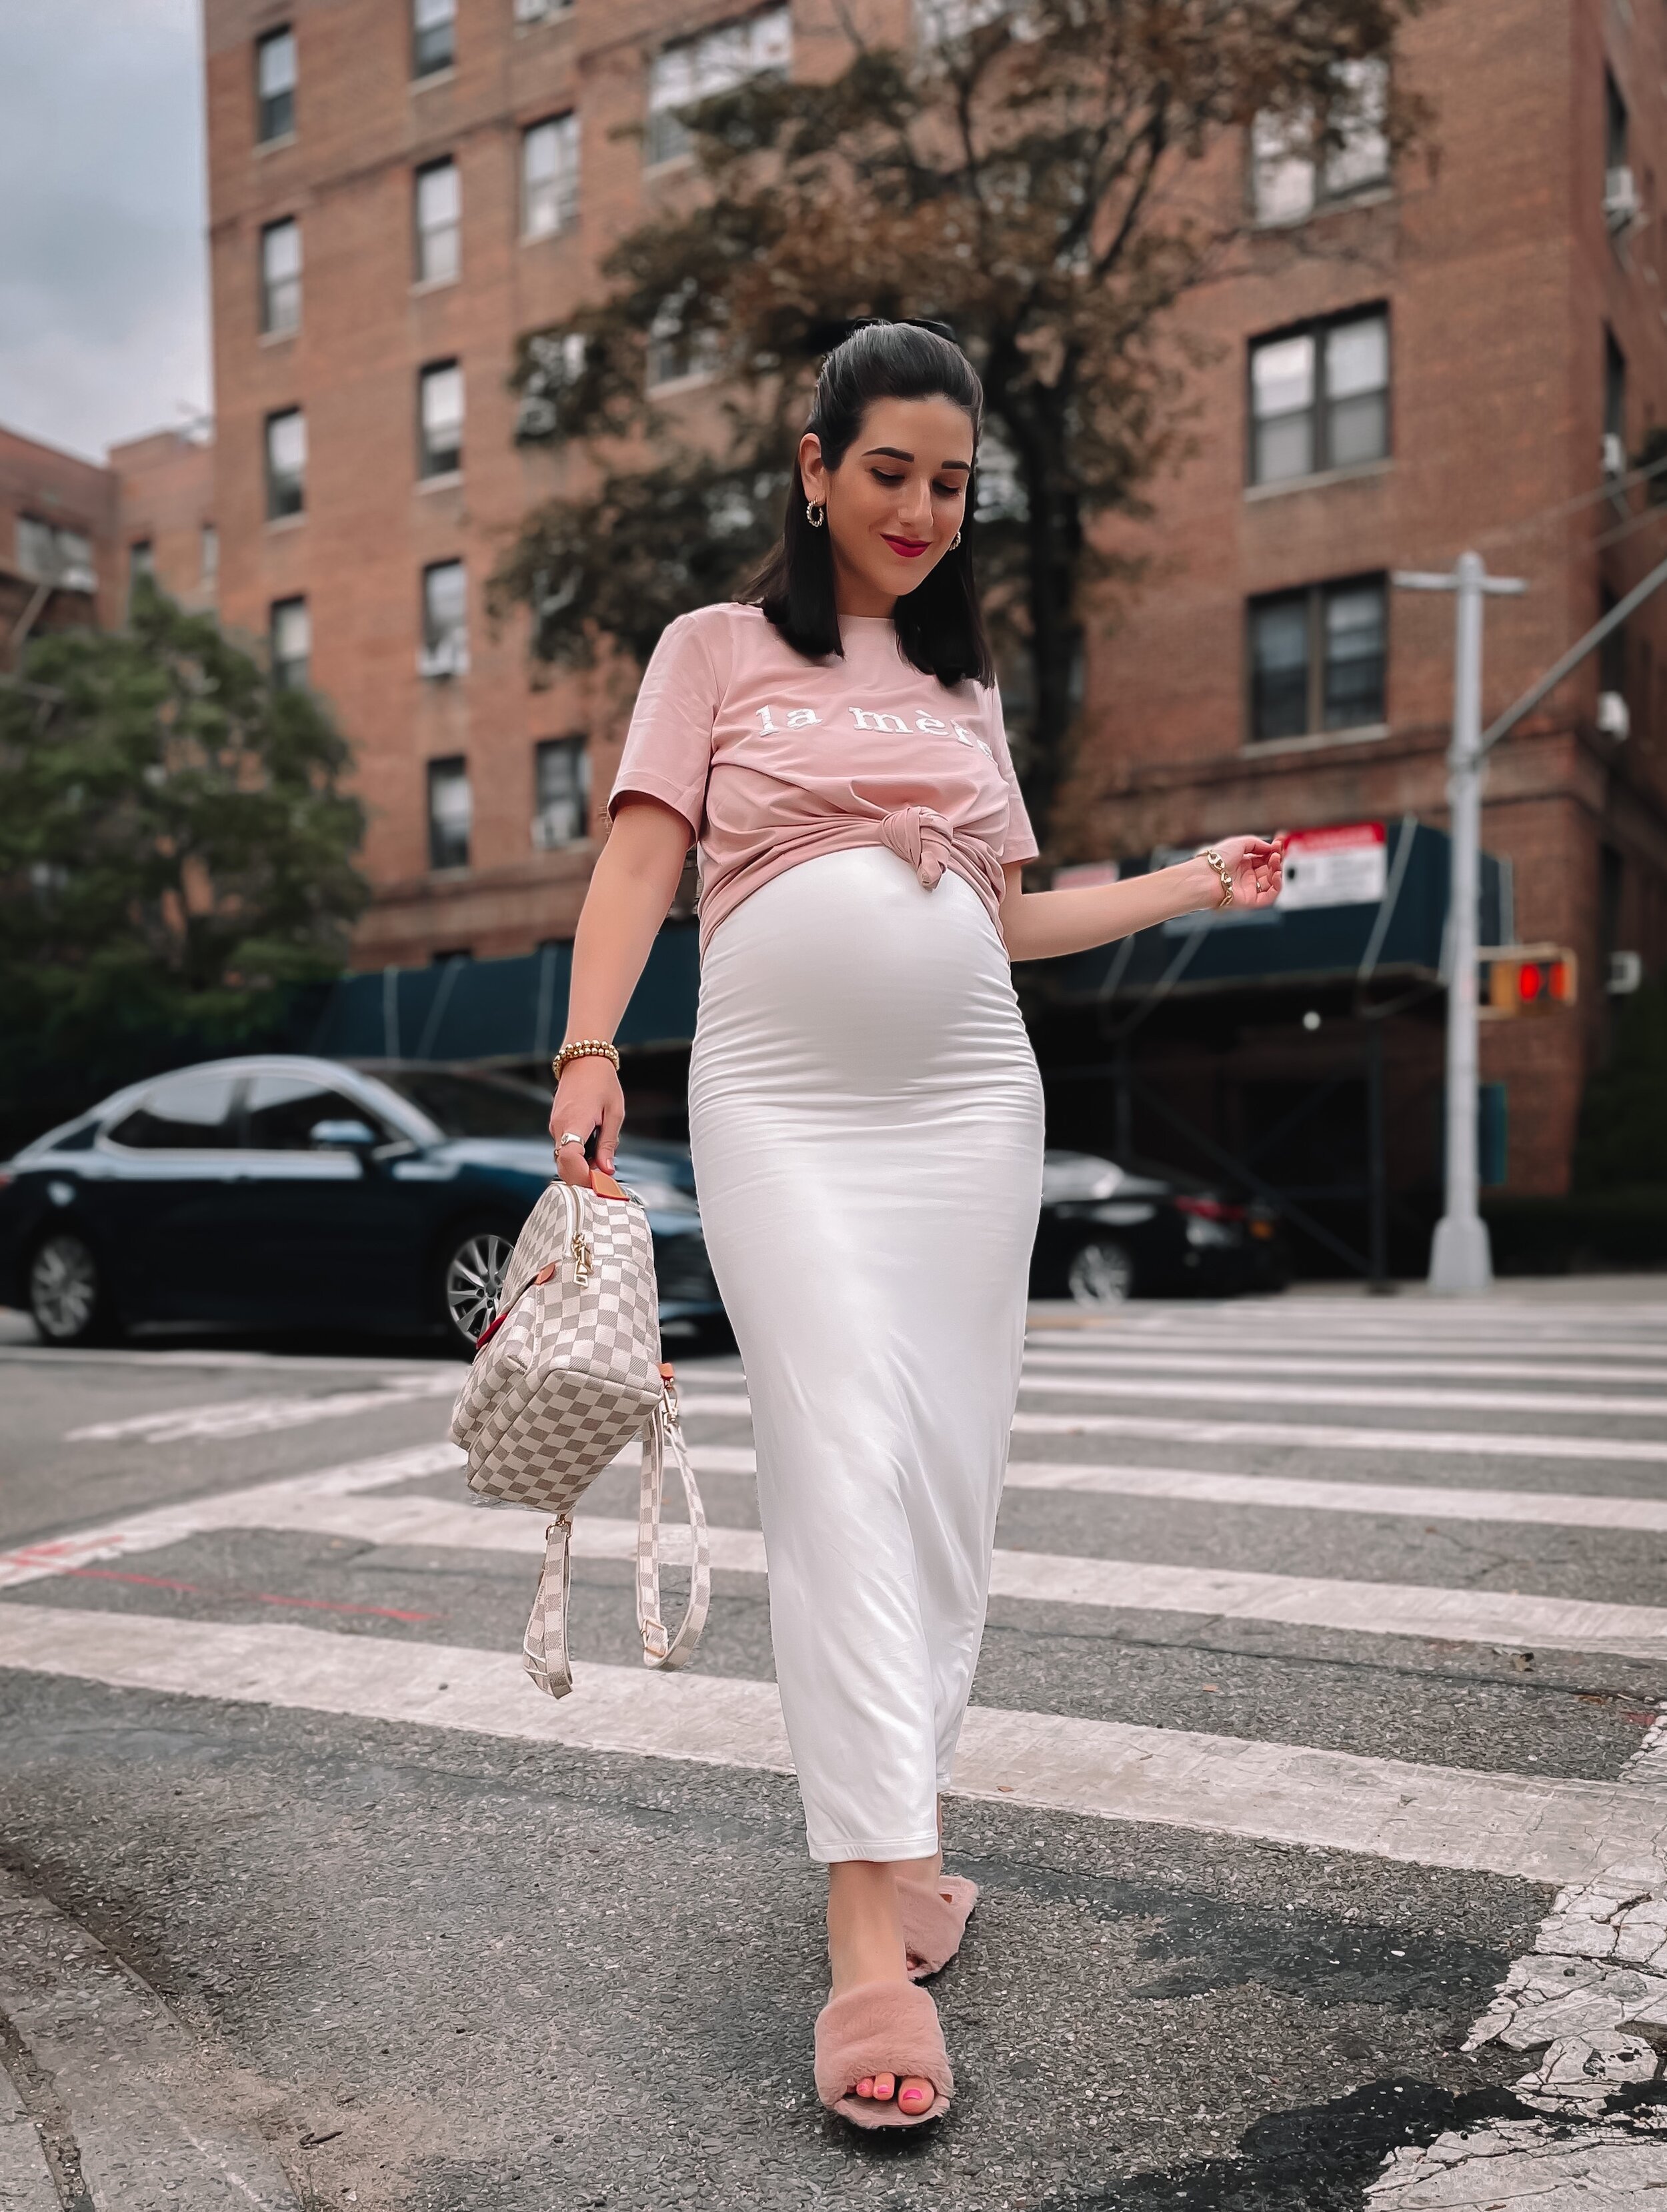 Stylish Maternity Clothes For The Bump + Beyond